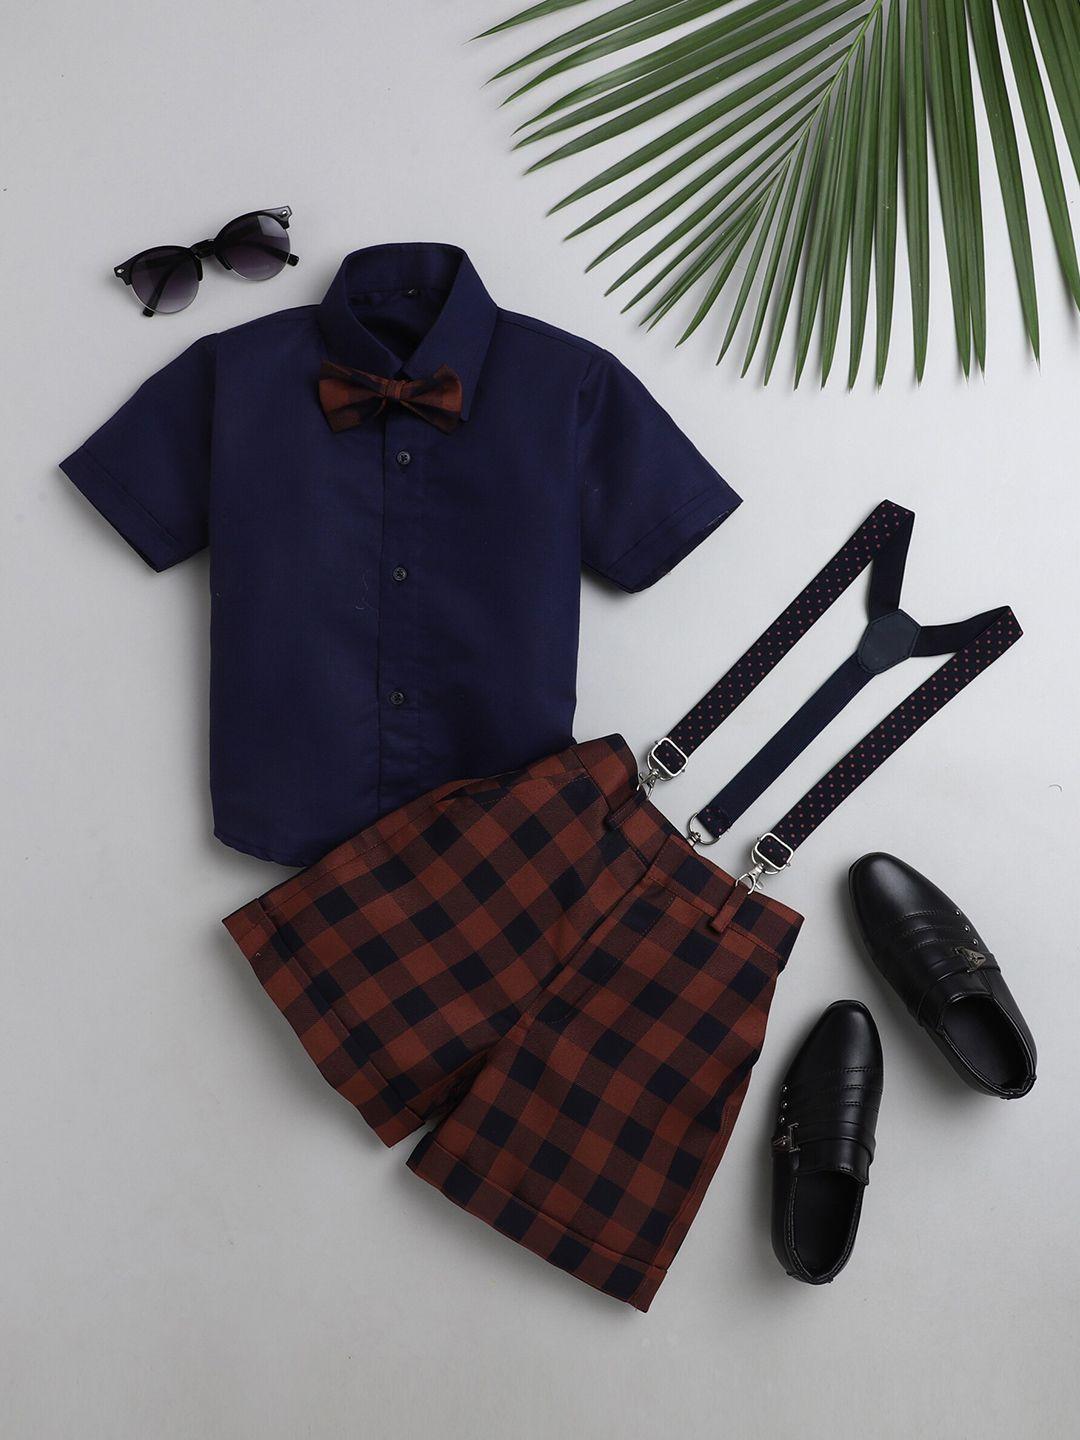 jeetethnics boys navy blue & brown shirt & shorts with suspenders